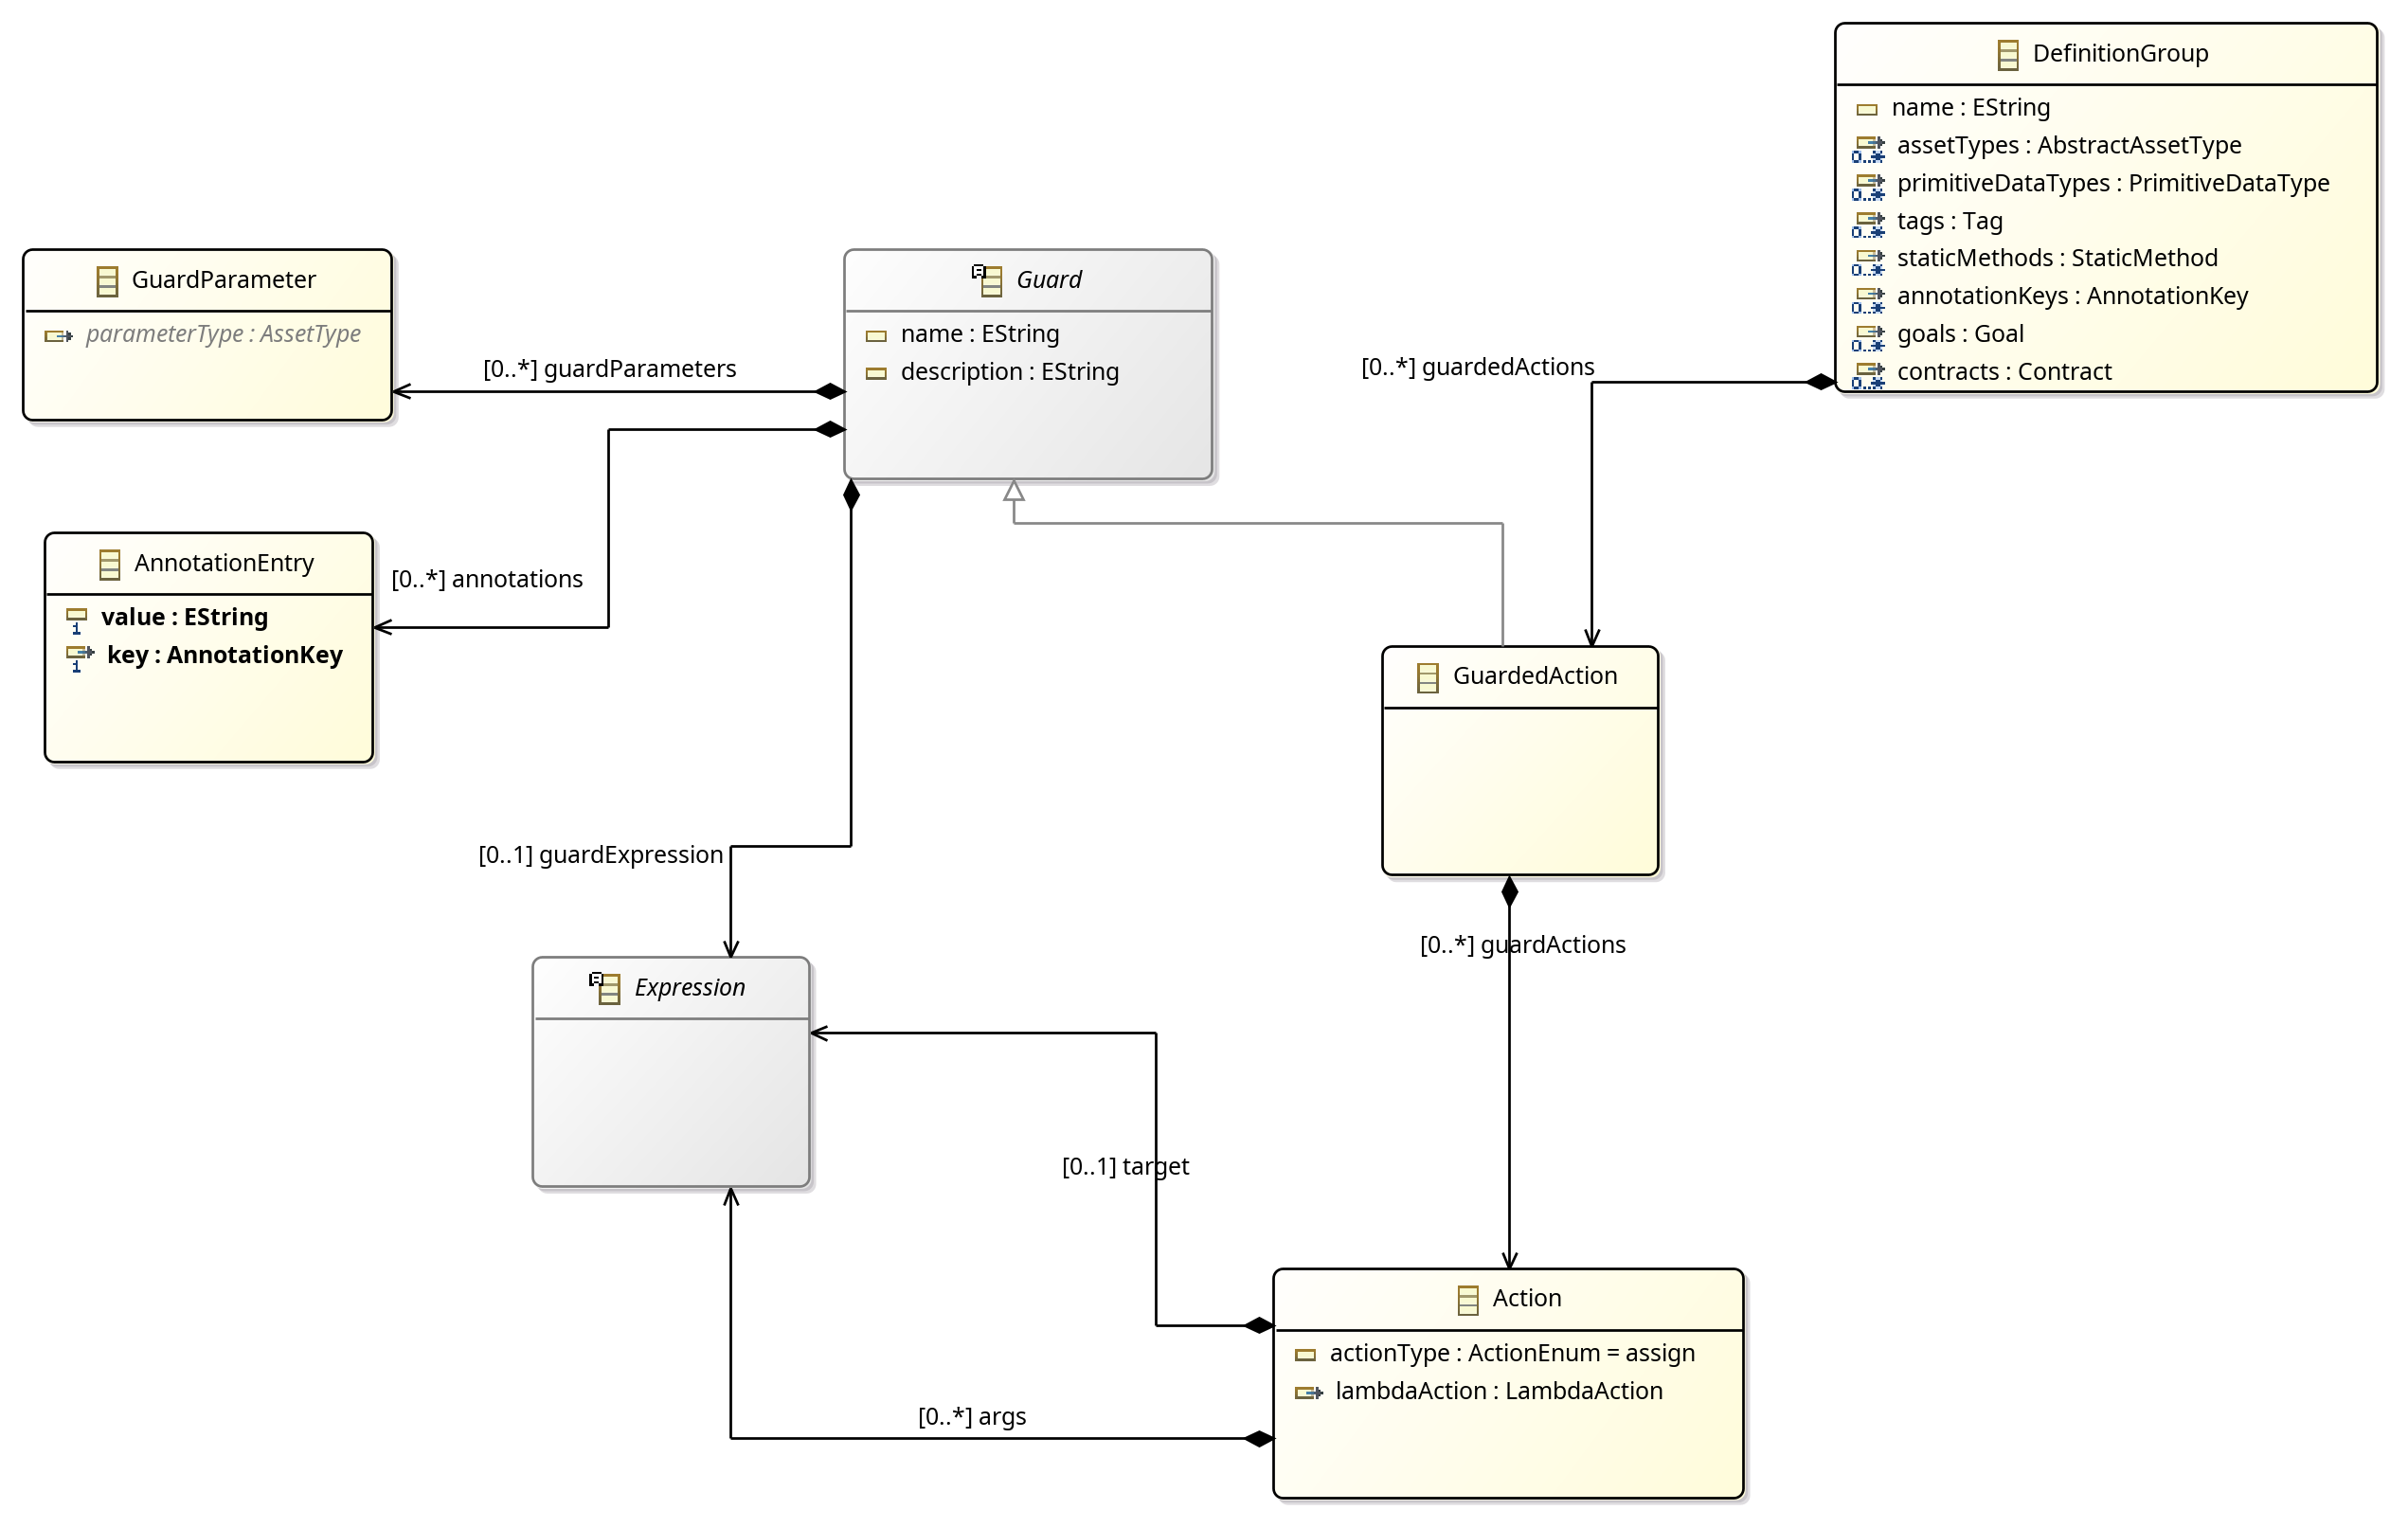 ABS GuardedActionDefinition class diagram